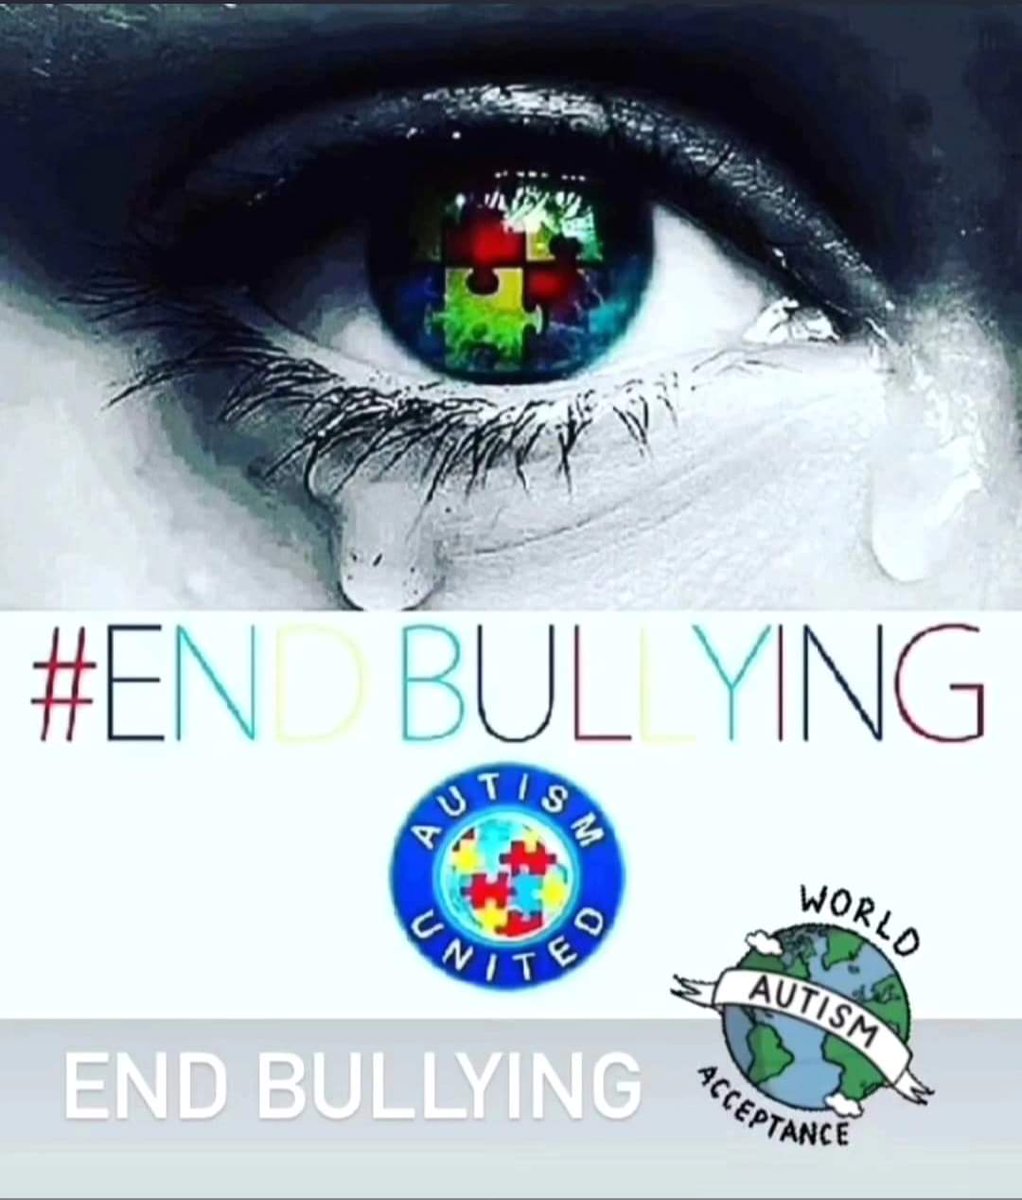 #endbullying Just so you know 🤔💙❤💚💜💛 #autismacceptance 🙌🏽 Every day is autism awareness day in our house. #autism #autismdad #autismawareness #autismawarenessmonth #autismfamily #autismparent #autismrocks #lightitupblue #differentnotless